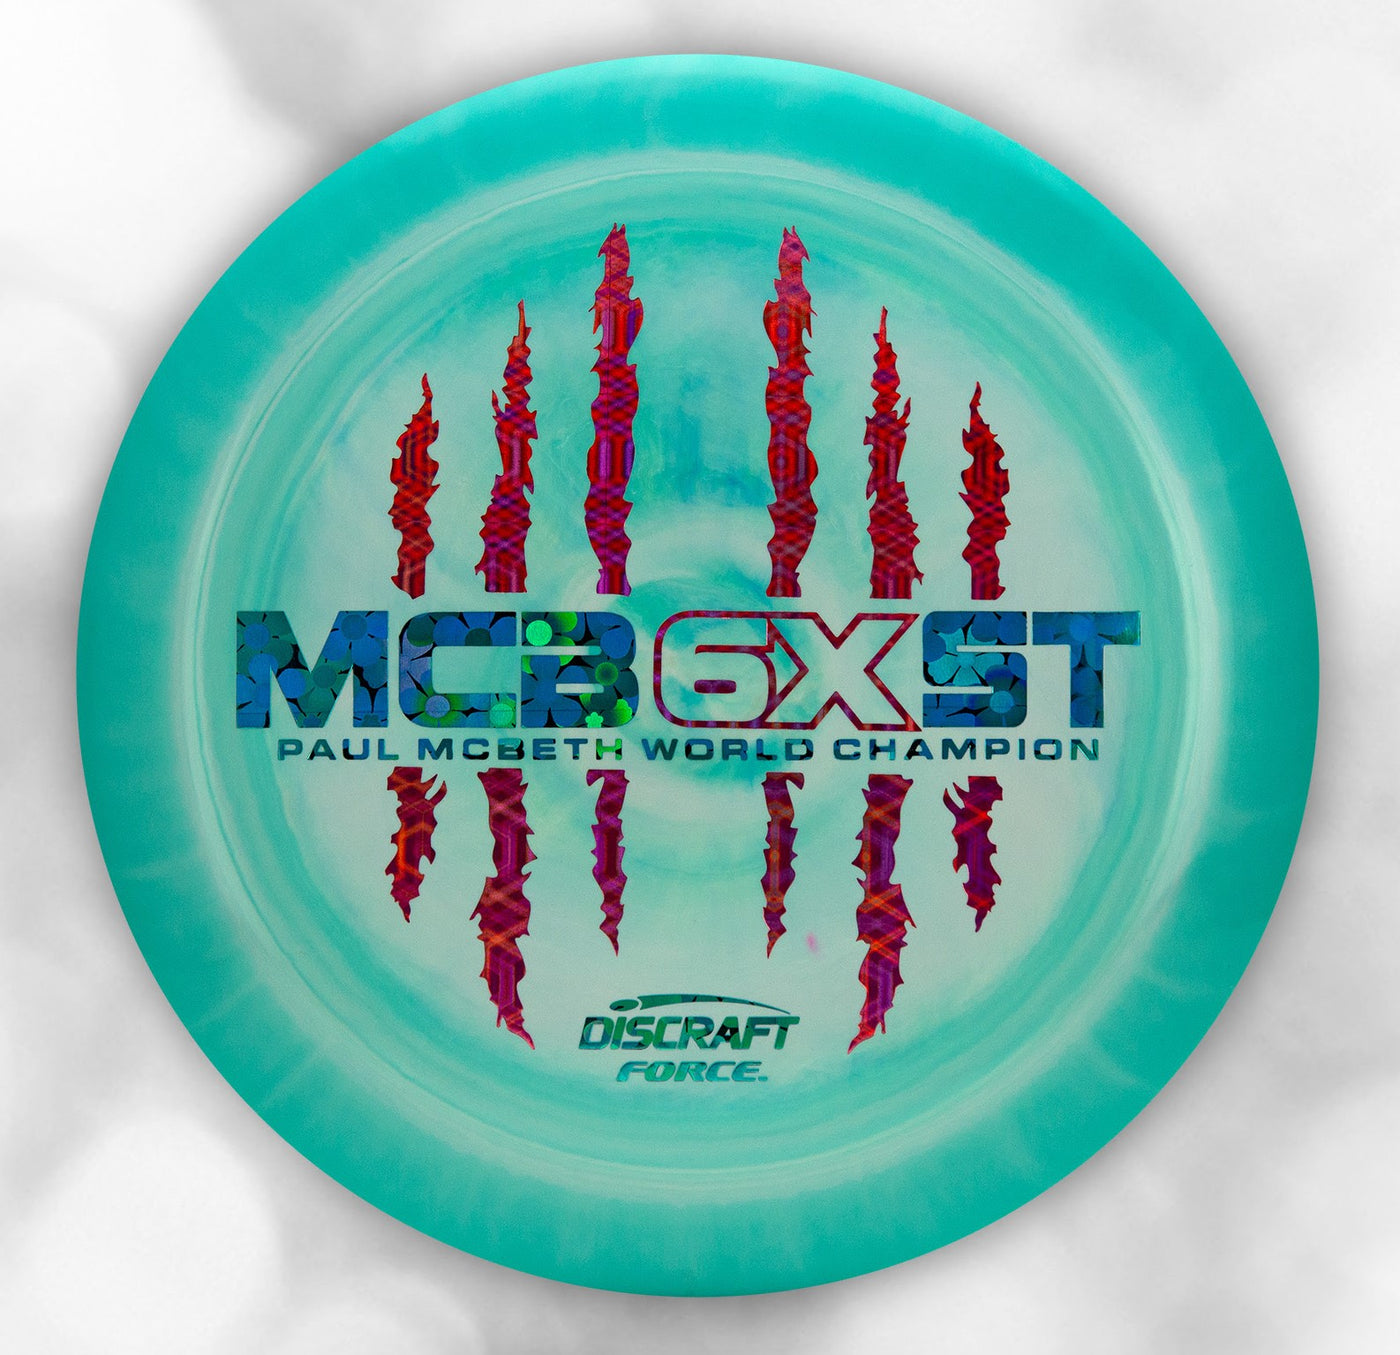 Discraft ESP Swirl Force Distance Driver with McBeast 6X Claw PM World Champ Stamp - Speed 12